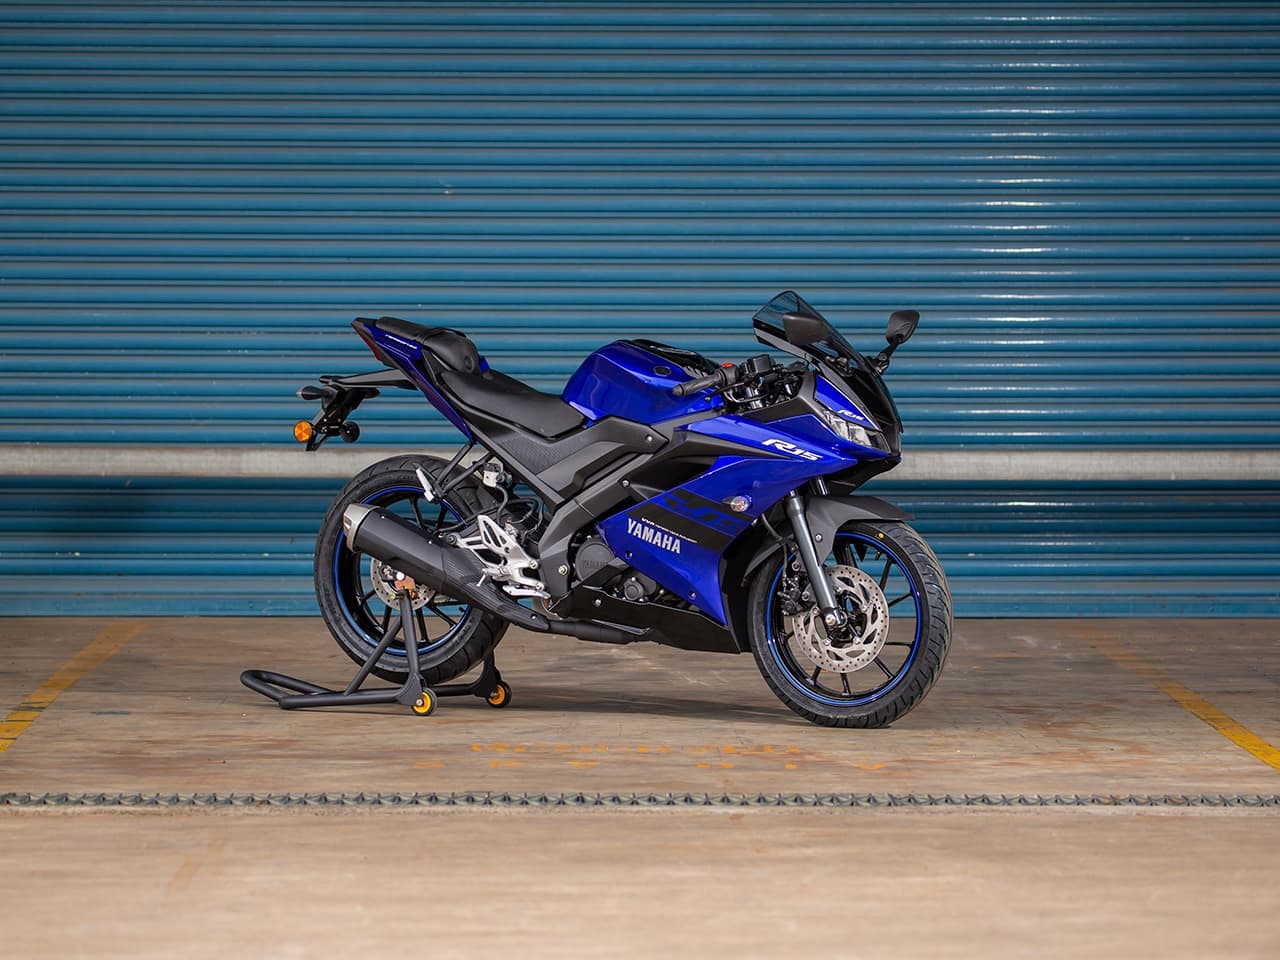 Yamaha YZF-R15 blue in front of wall